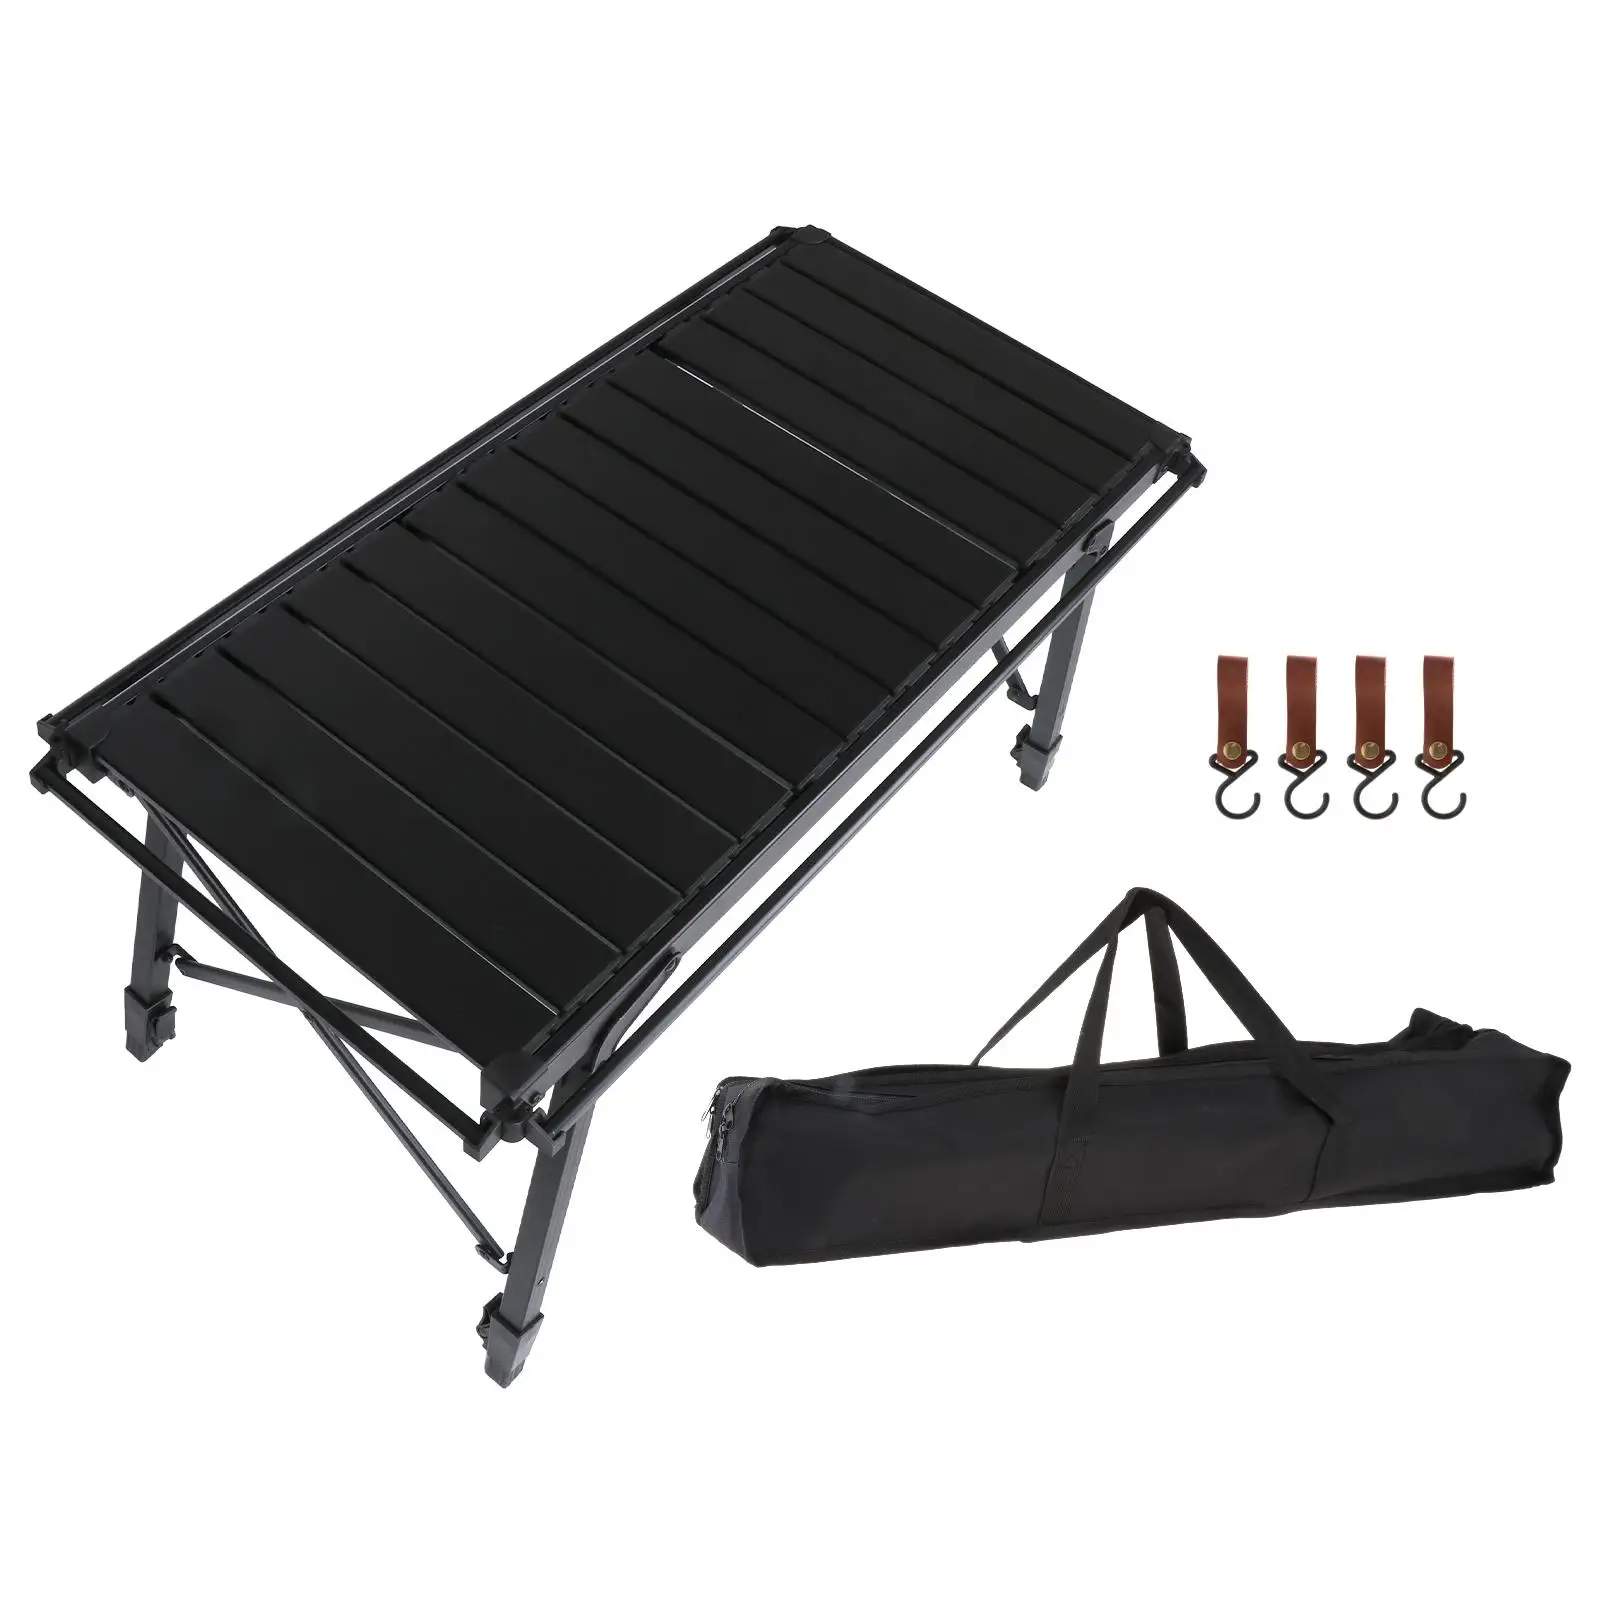 Camping Folding Table Portable Adjustable Height Foldable Picnic Table Outdoor Table for Fishing Deck Cooking Kitchen Hiking